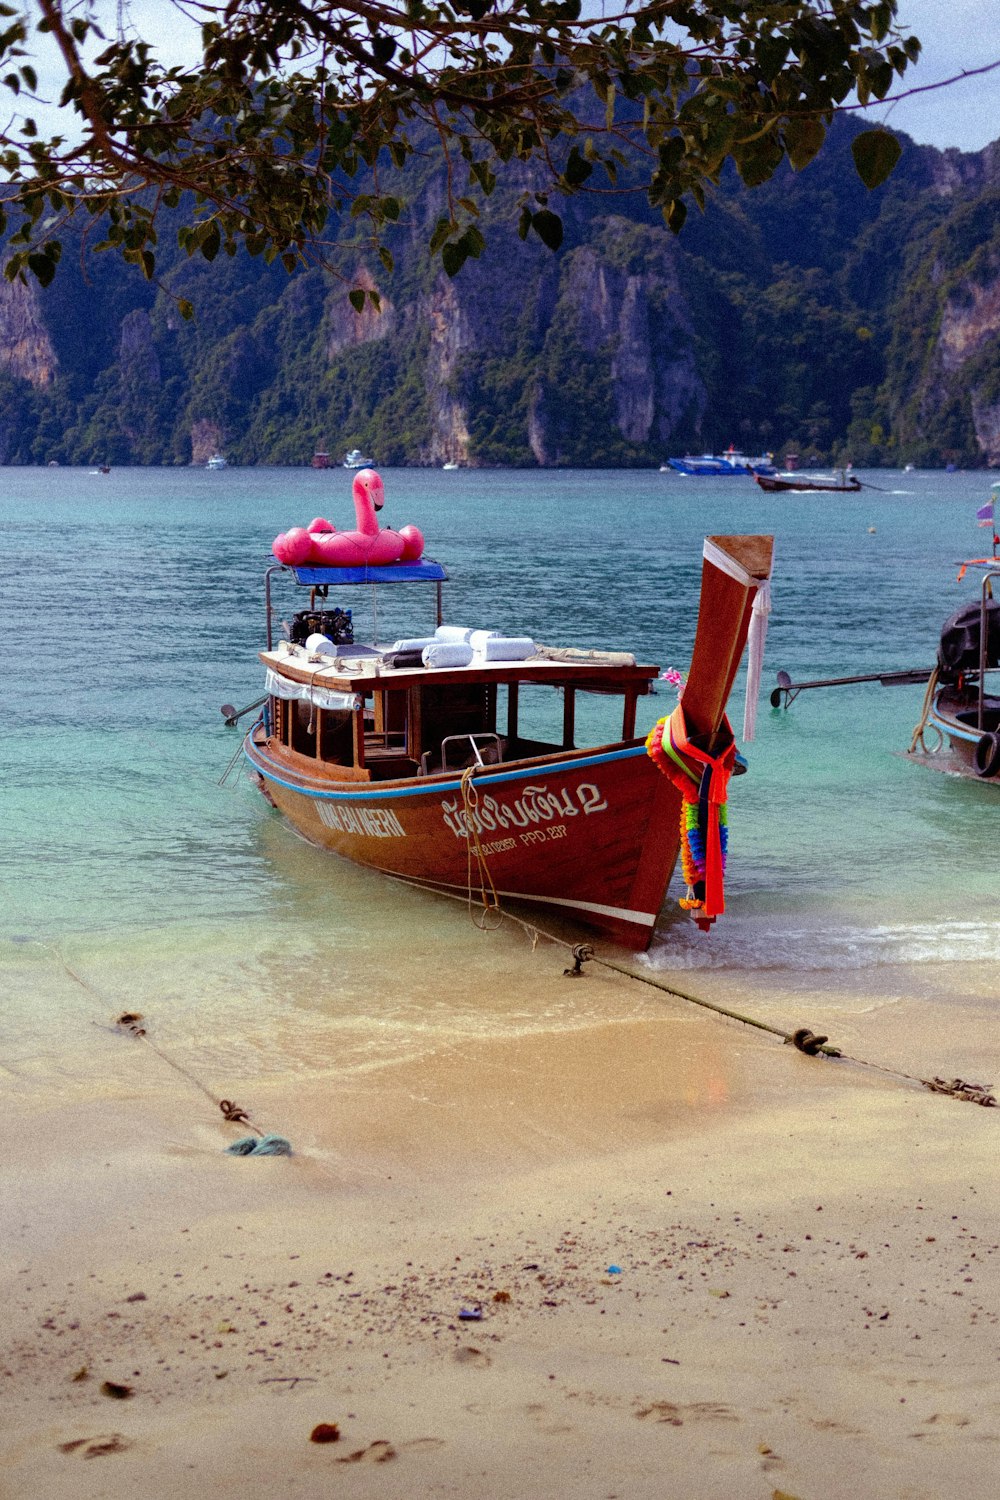 a boat is docked on the shore of a beach